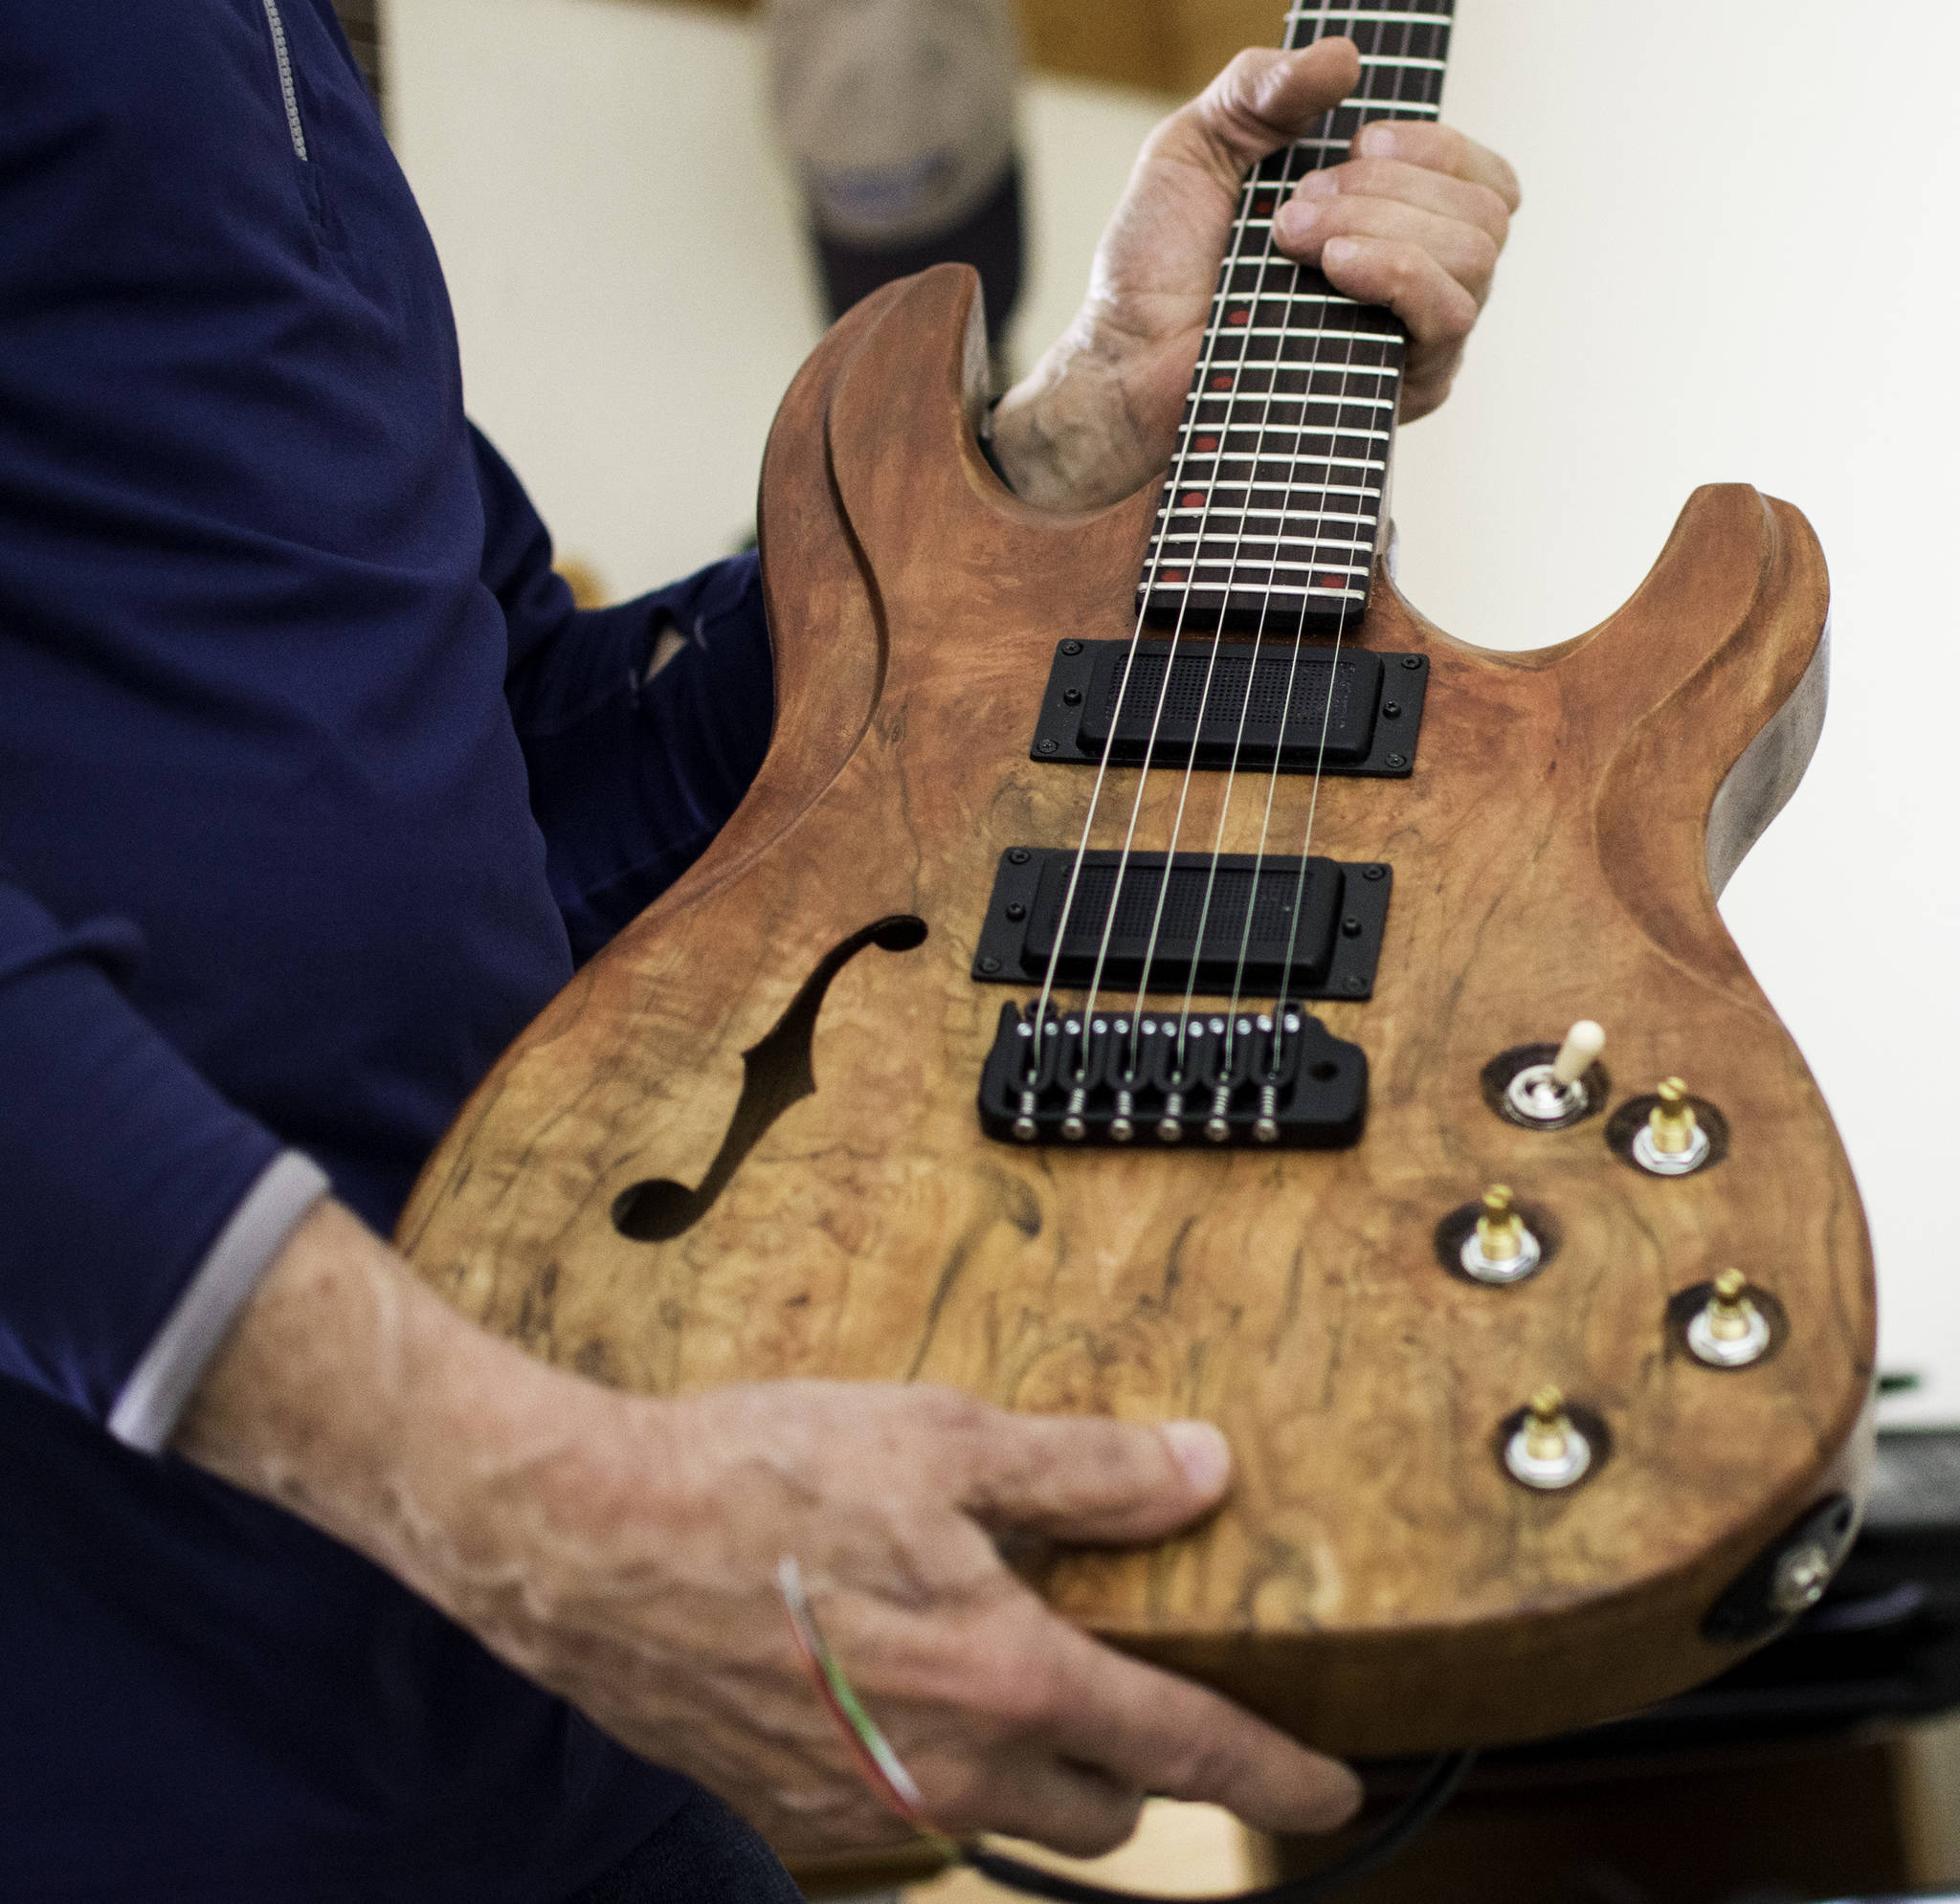 George Gress holds a guitar he made from repurposed wood at his home in Juneau on Tuesday, March 27, 2018. Richard McGrail | For the Capital City Weekly